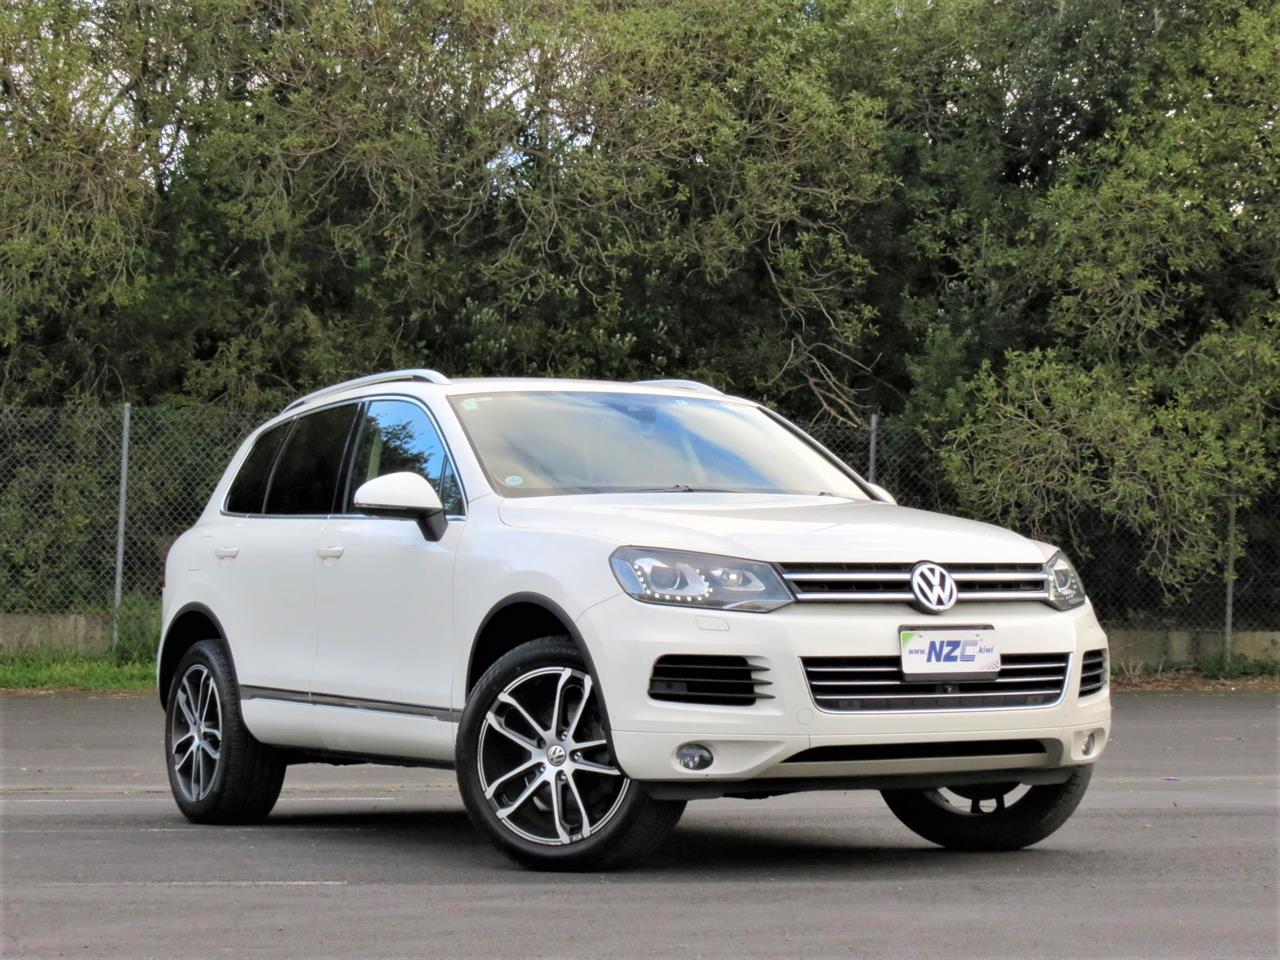 NZC 2012 Volkswagen Touareg just arrived to Auckland